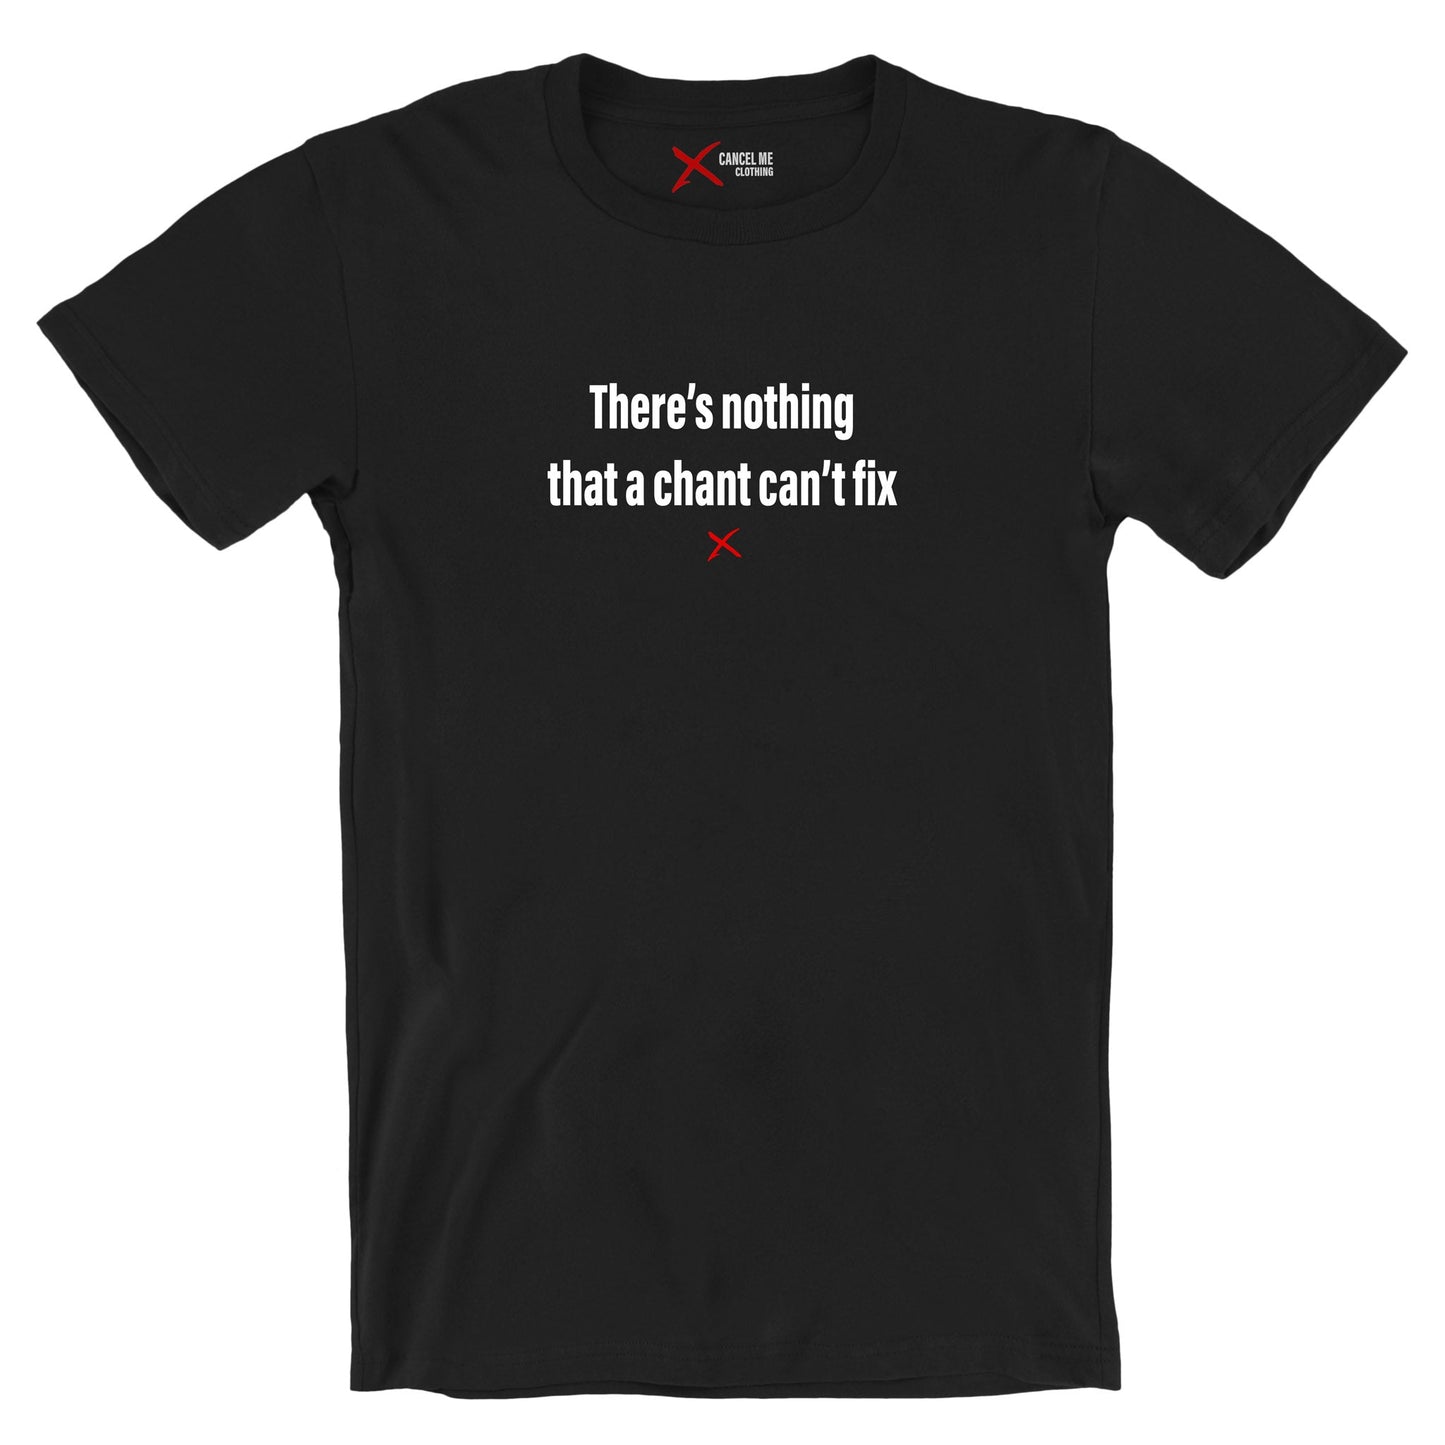 There's nothing that a chant can't fix - Shirt